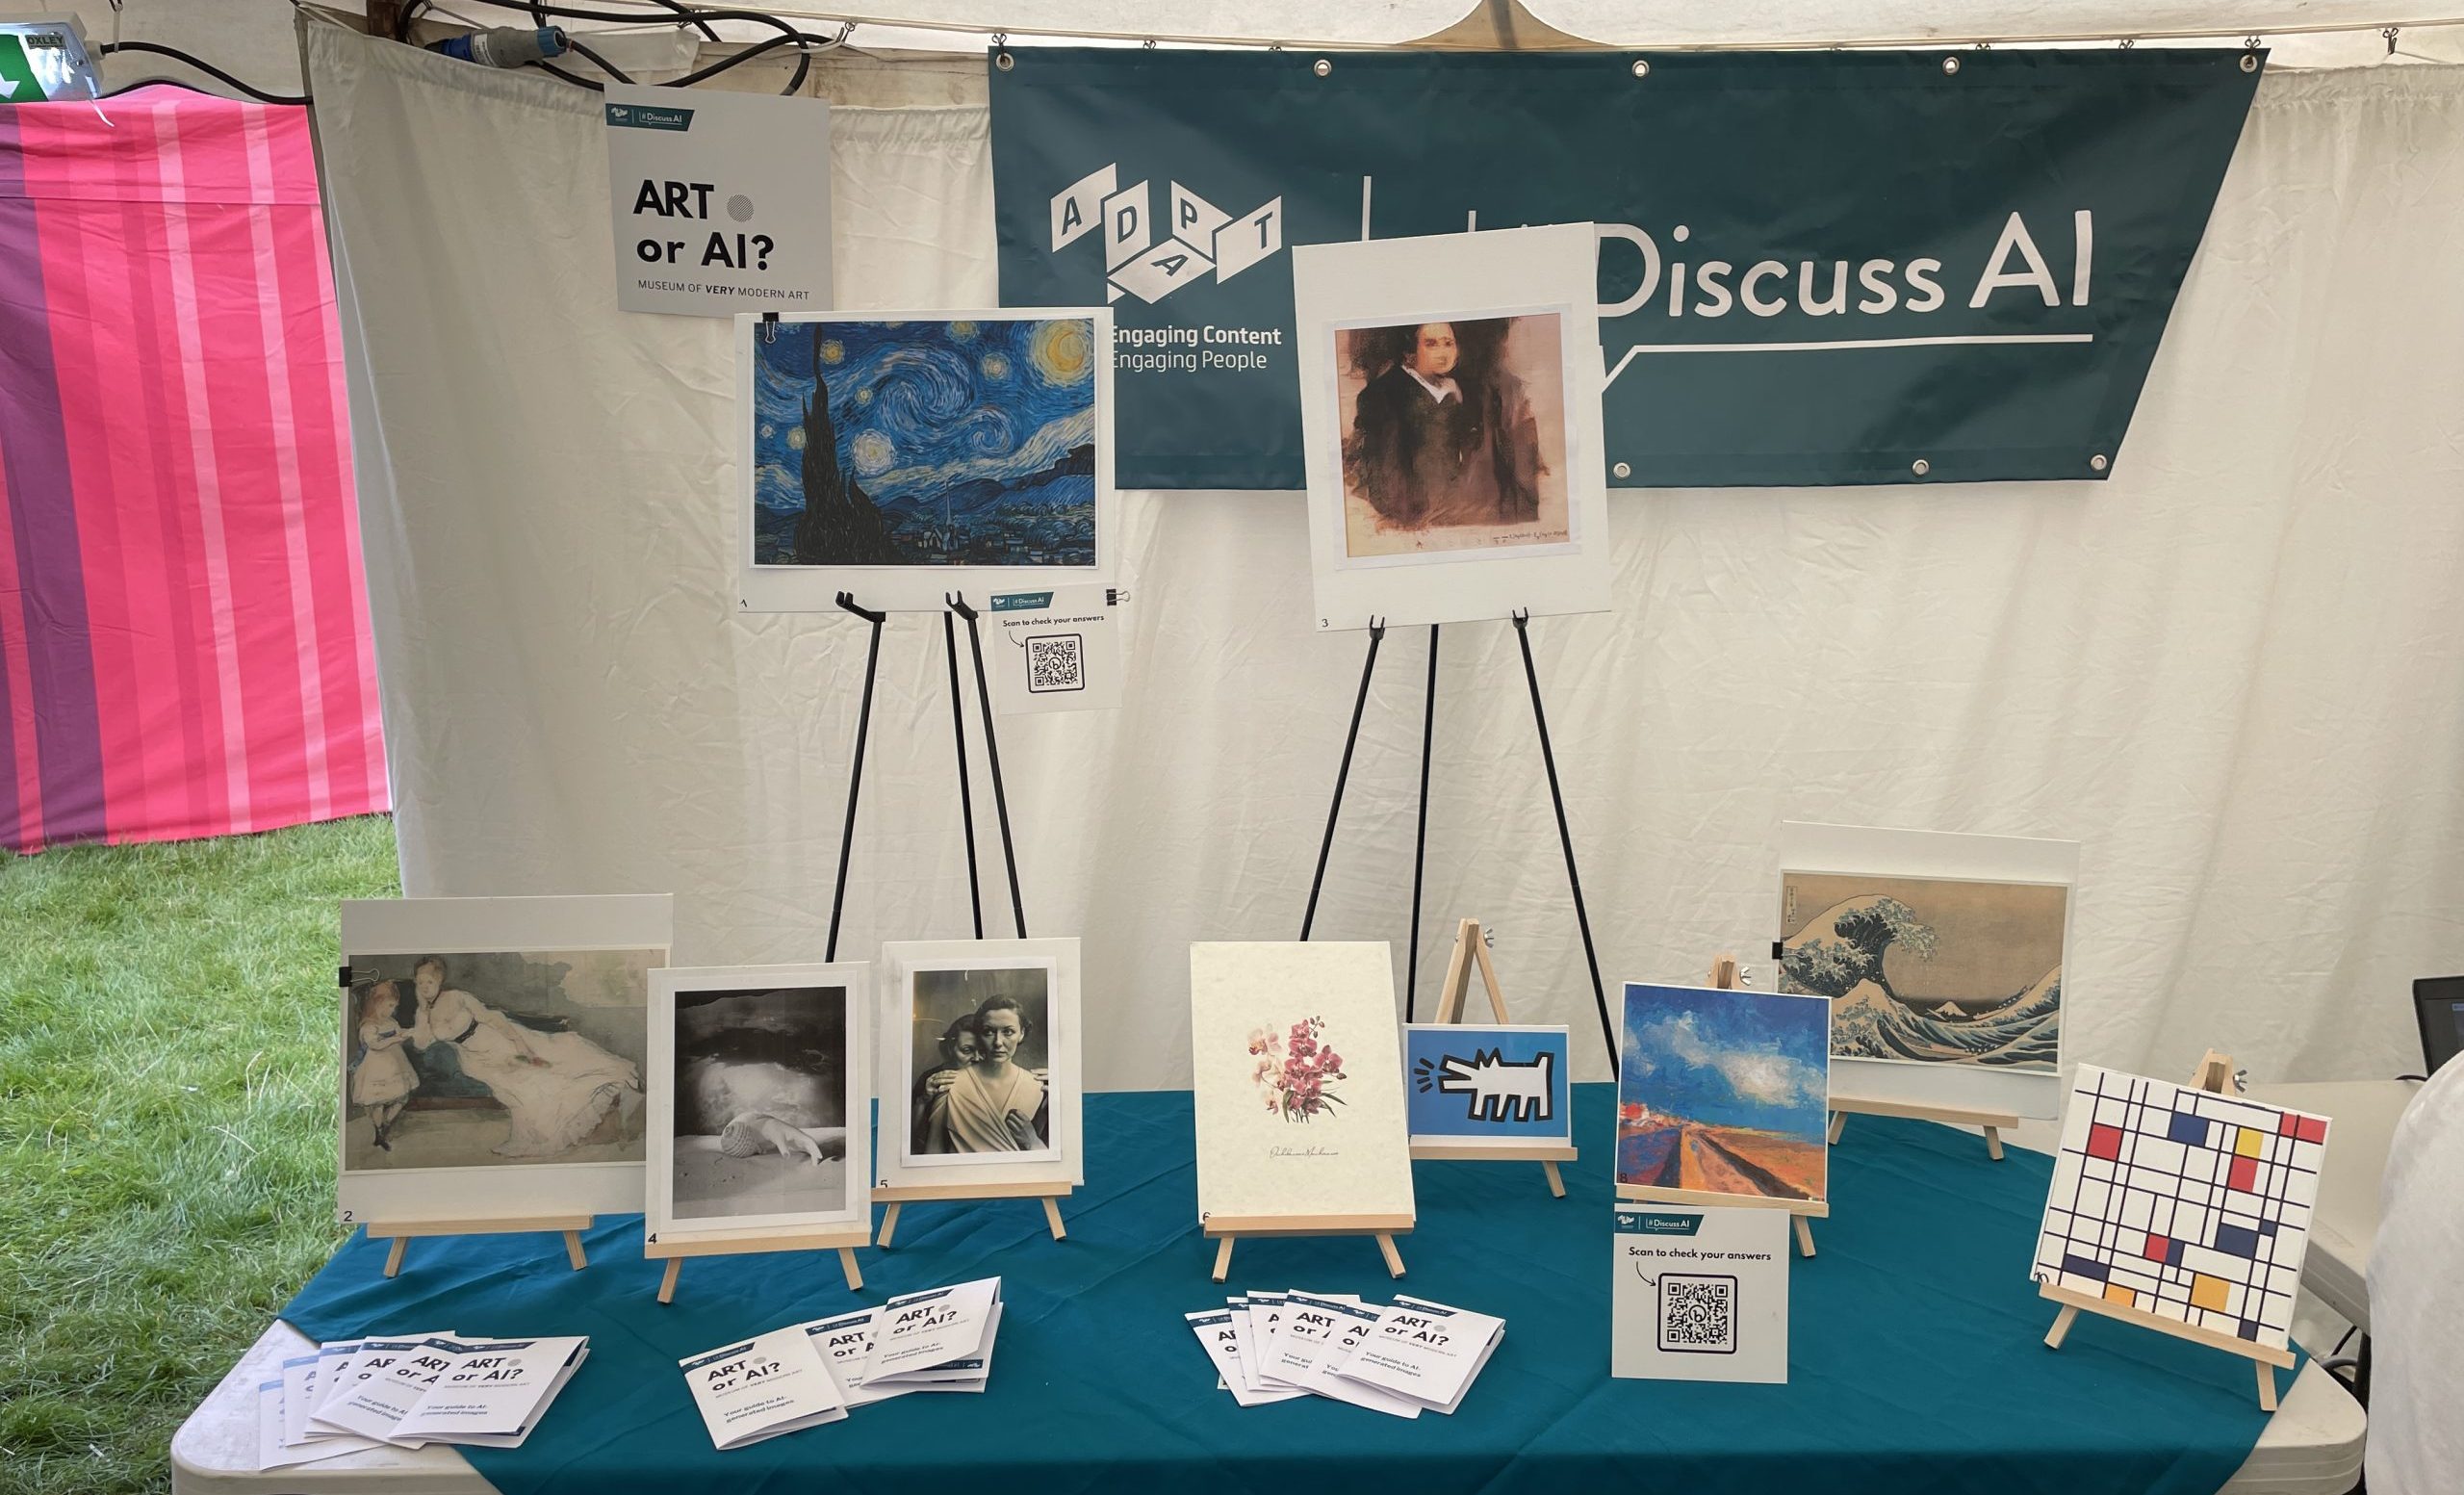 A table with a teal green tablecloth. On the table there are a number of artworks displlayed on easels. Behind the table, there is a banner with the ADAPT logo and the #DiscussAI logo.